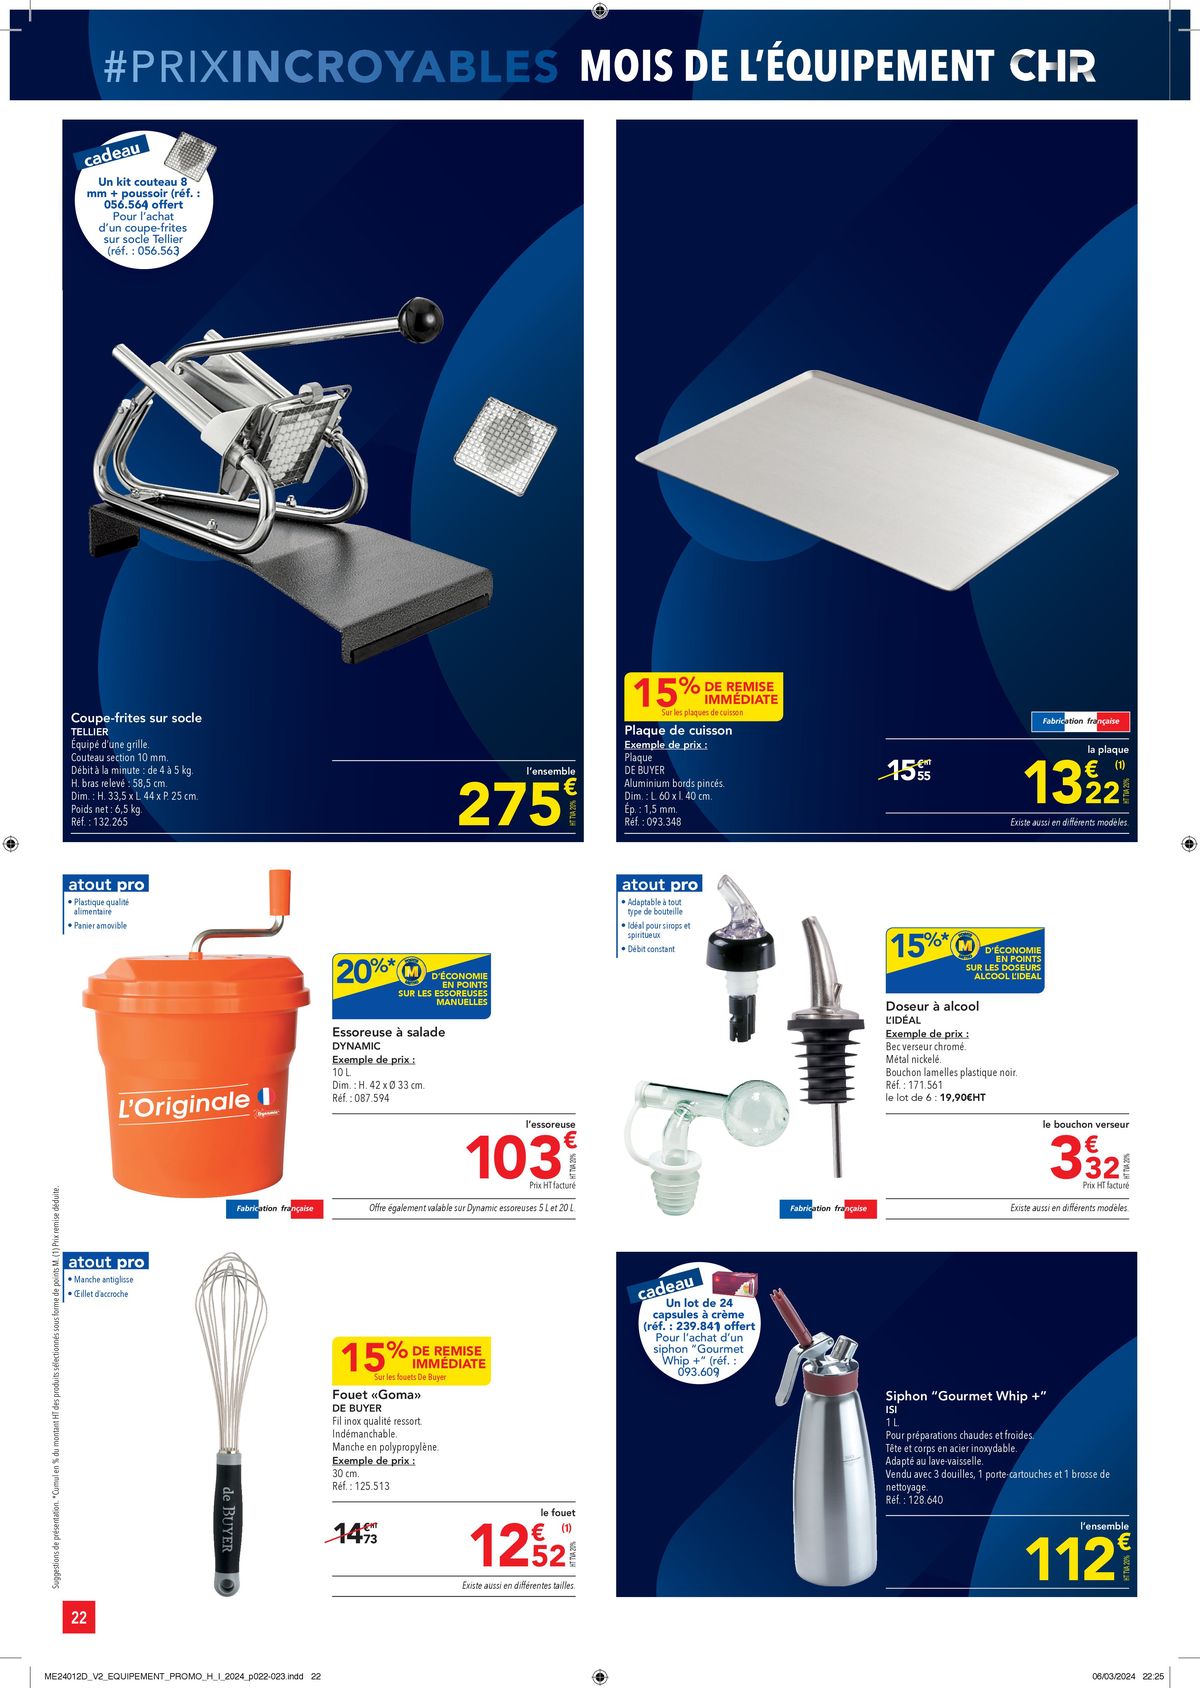 Catalogue Equipement CHR, page 00022